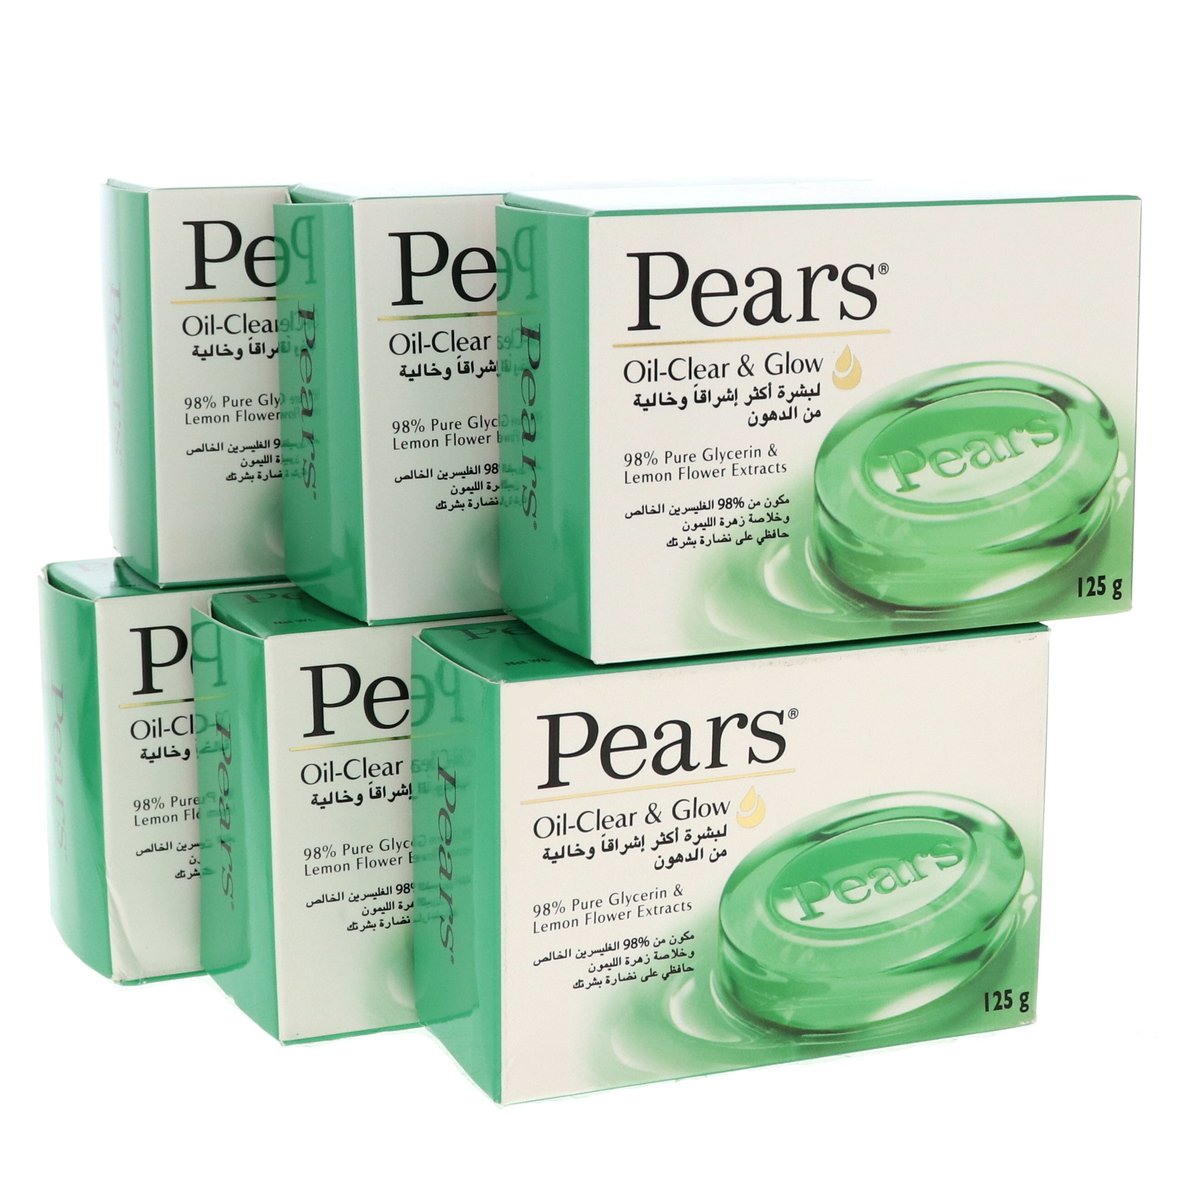 Pears Soap Pure Glycerin & Lemon Flower Extracts 6 x 125 g